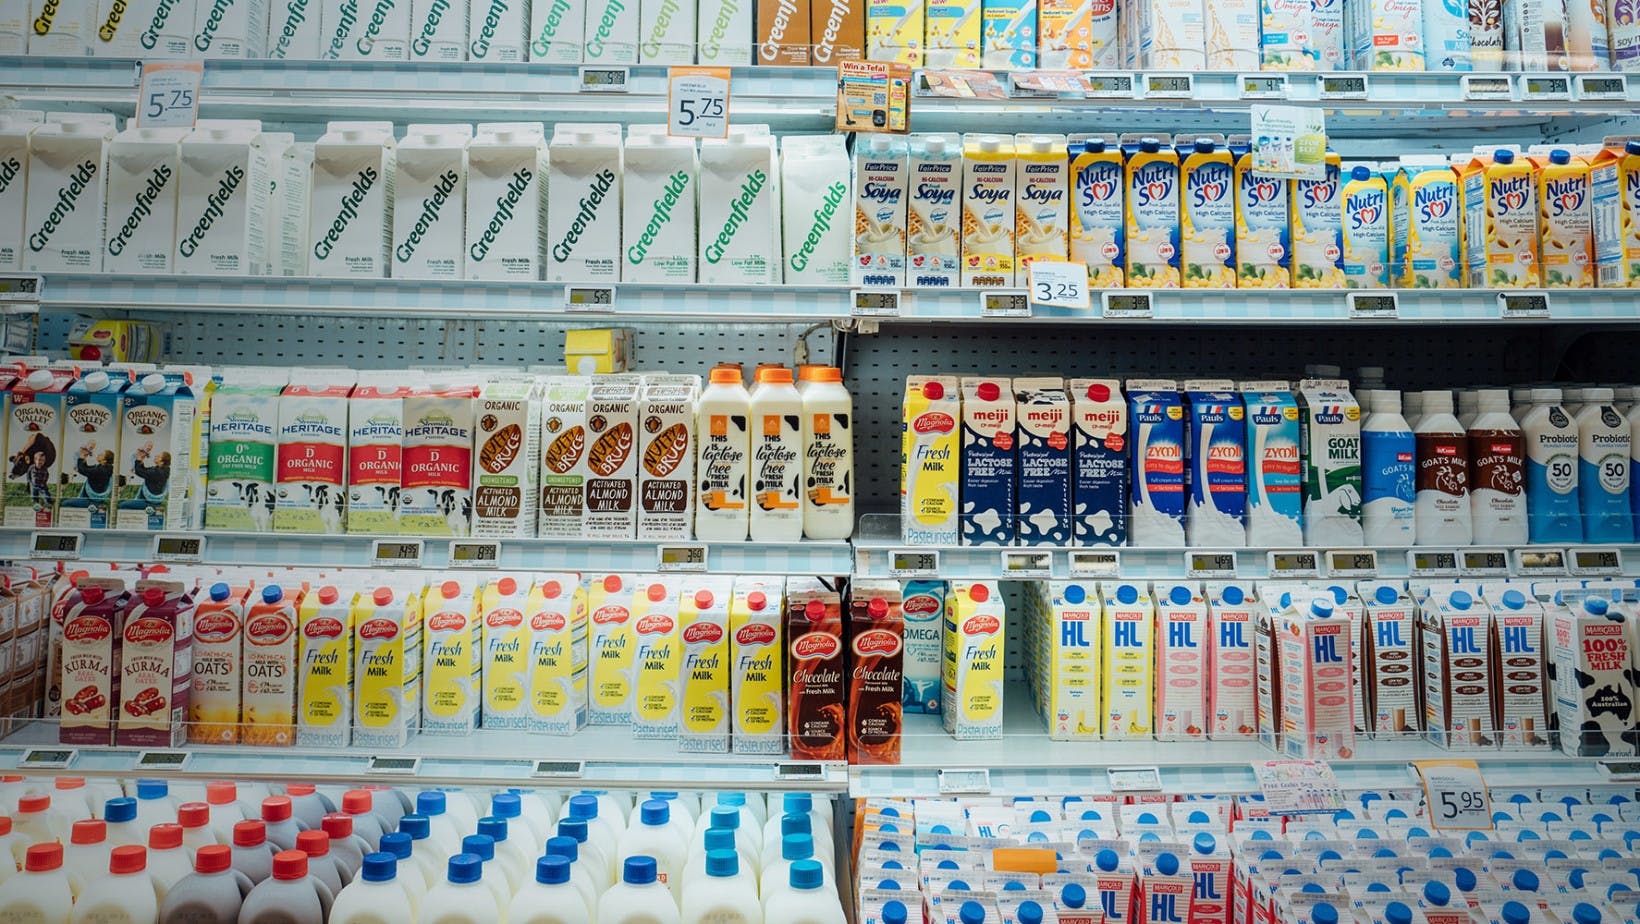 Milk shelves in a store. This photo represents the variation in prices.